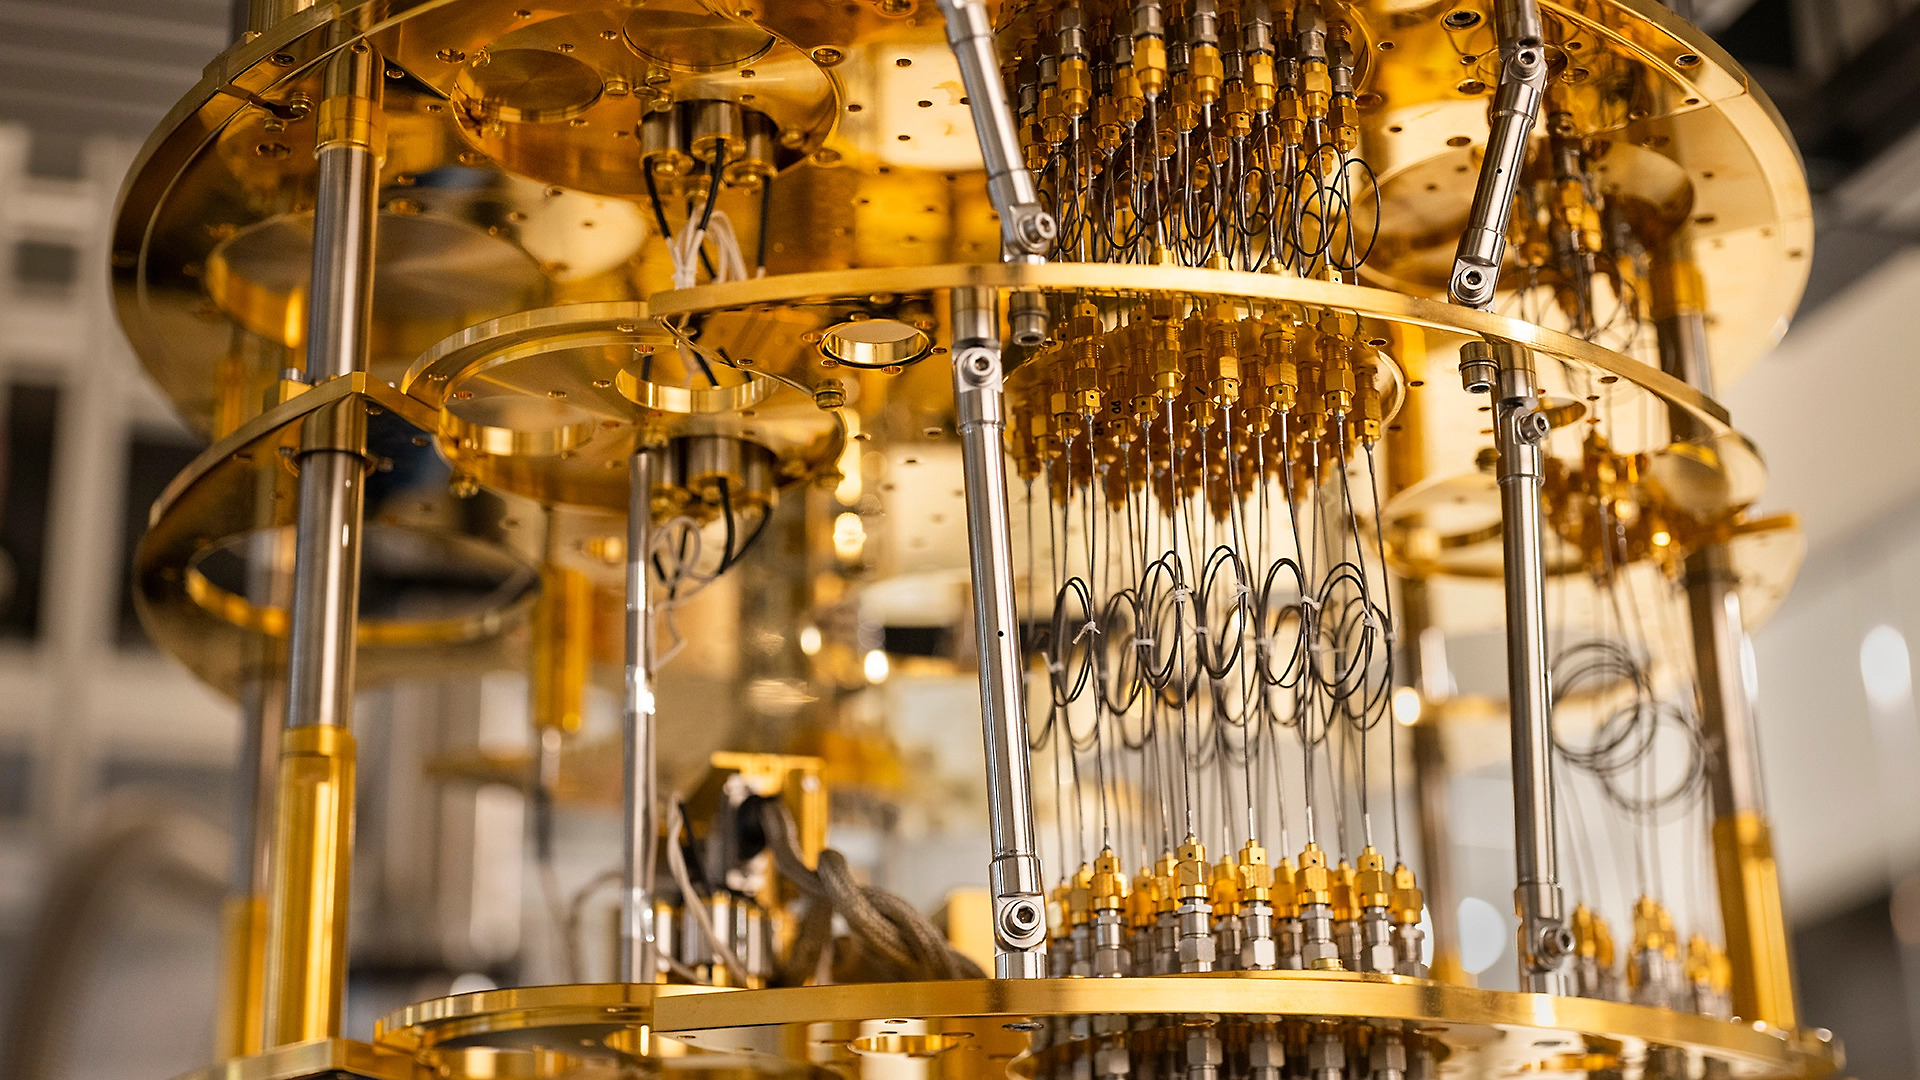 A large golden machine with many wires and coils